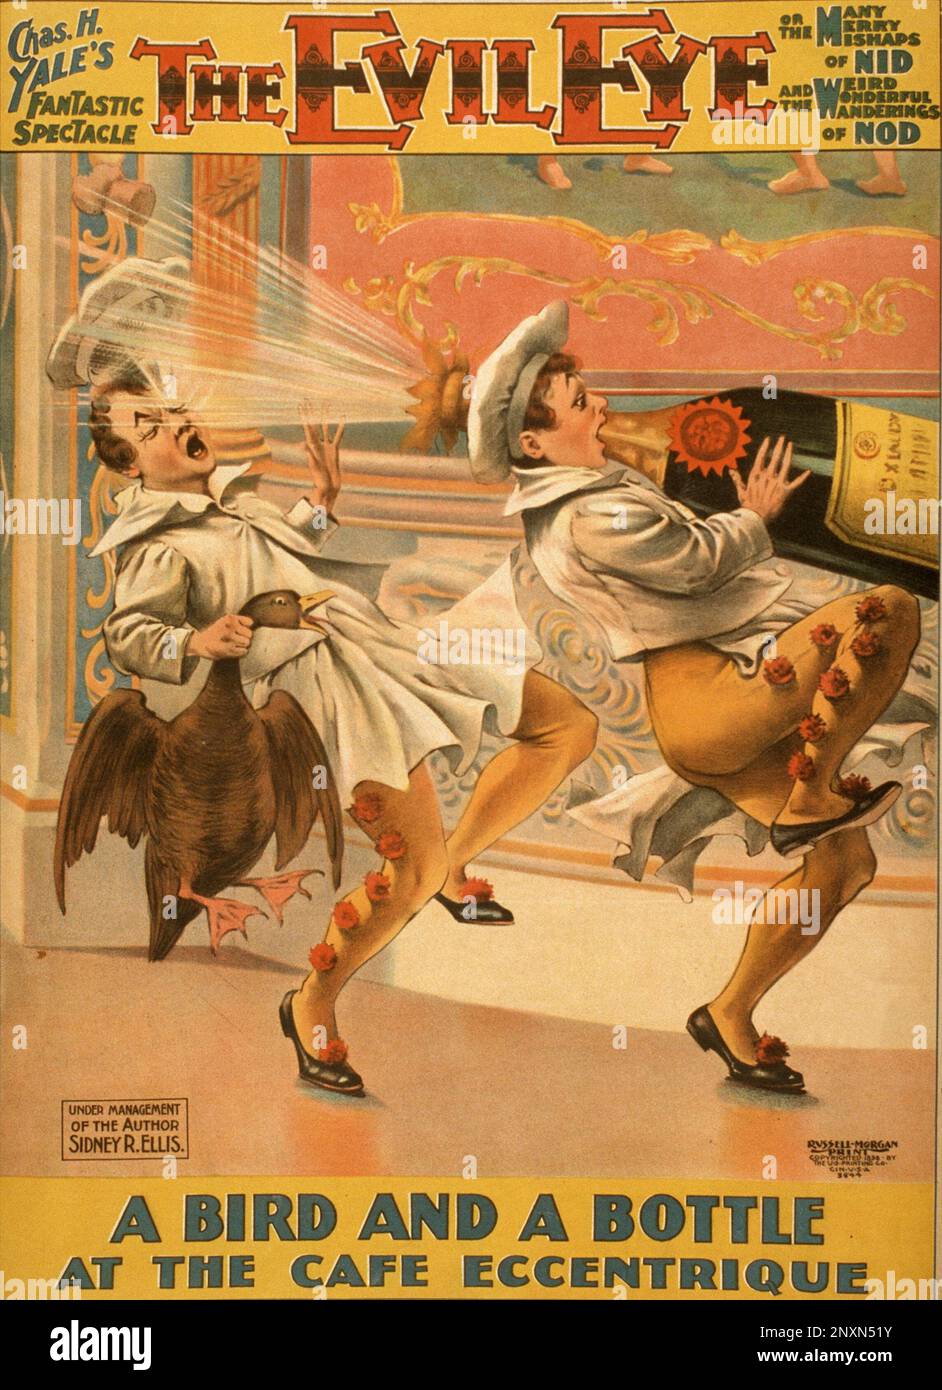 Theatrical poster for Chas. H. Yale's fantastic spectacle, The evil eye, or The many, merry mishaps of Nid and the weird, wonderful wanderings of Nod, 1898. Charles H. Yale (1856-1920) was an American theater producer and performer. Stock Photo